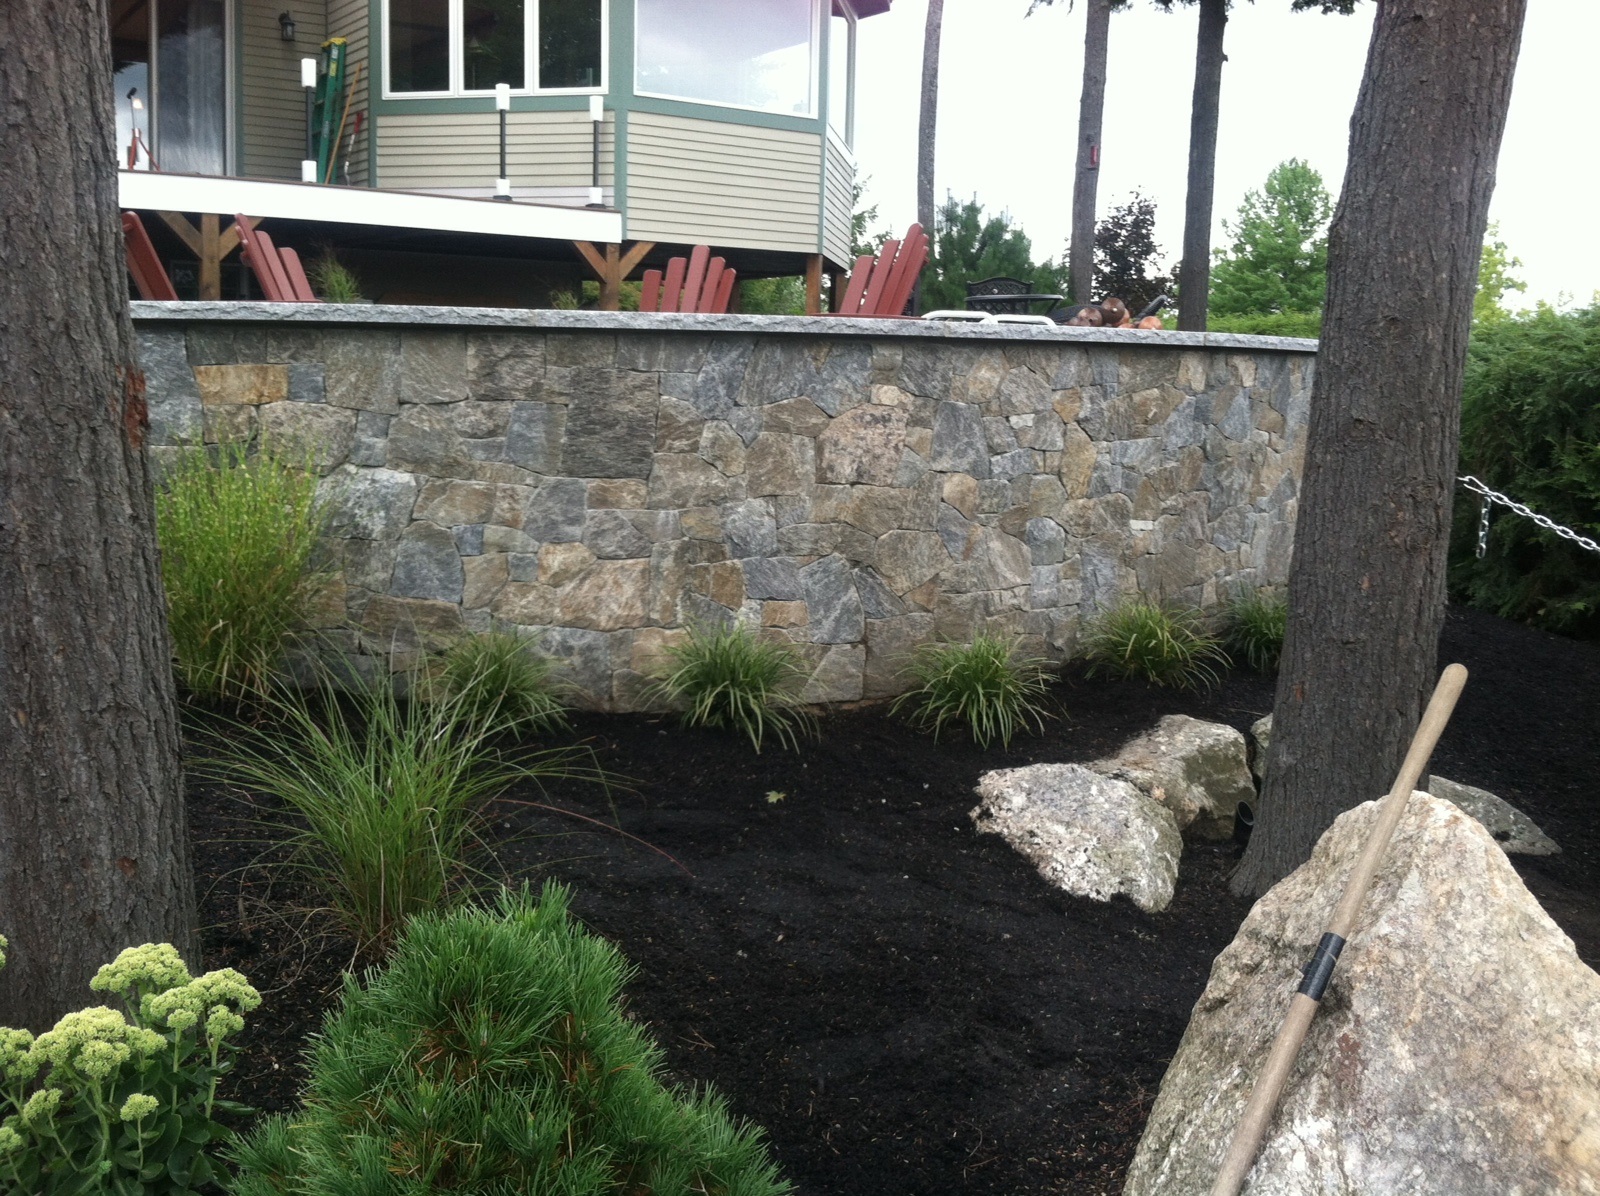 Landscaper mason in Hollis, NH and masonry in Amherst NH